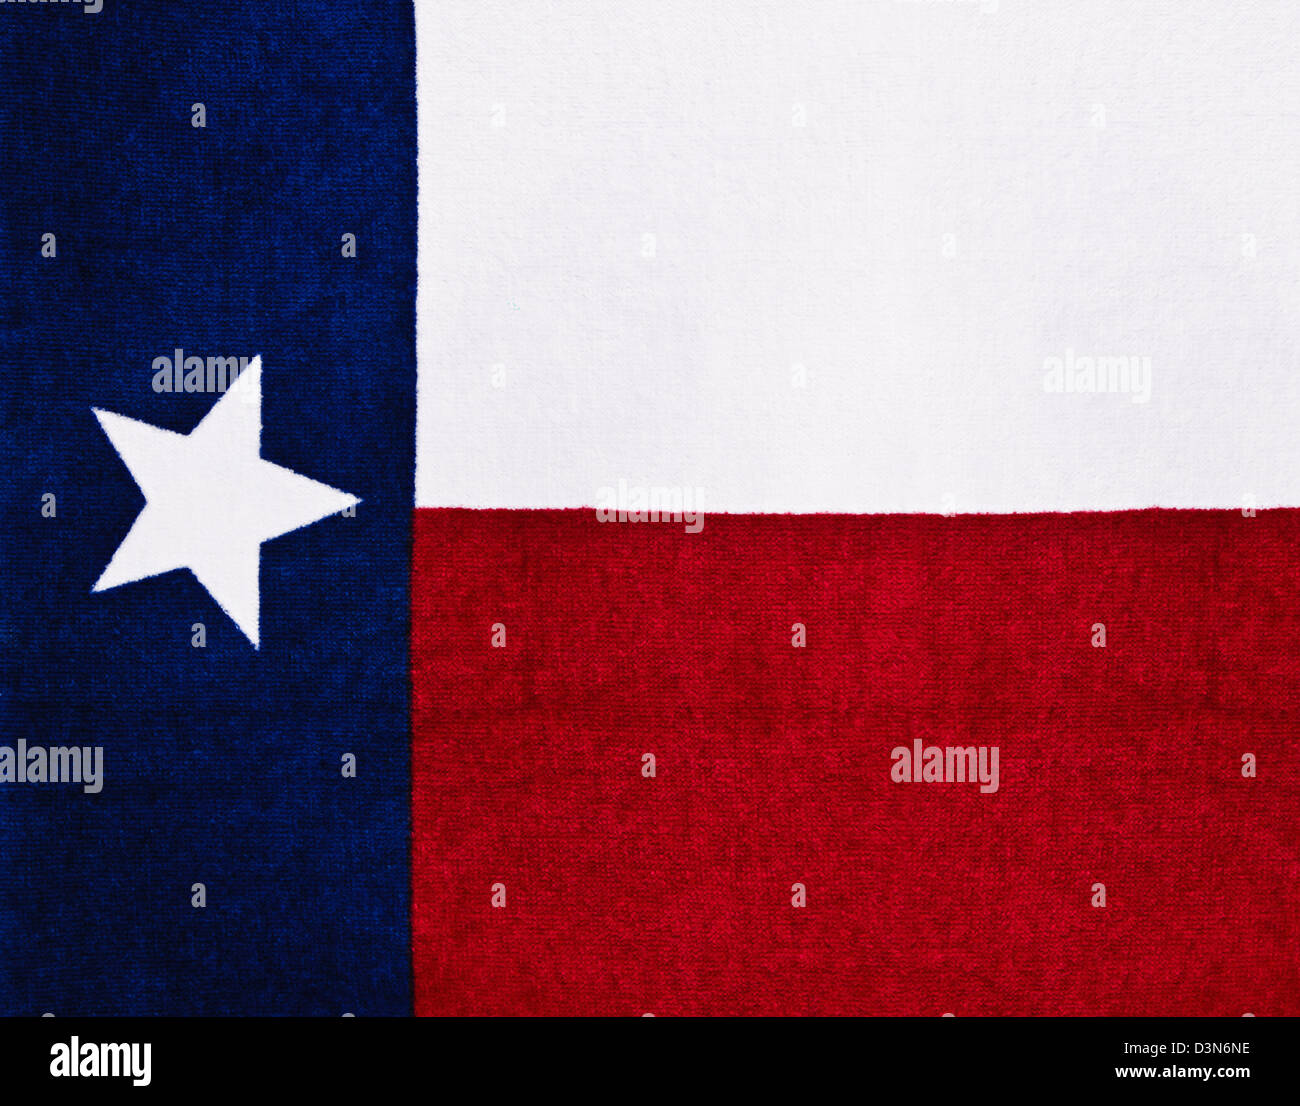 Texas state flag on textured fabric Stock Photo